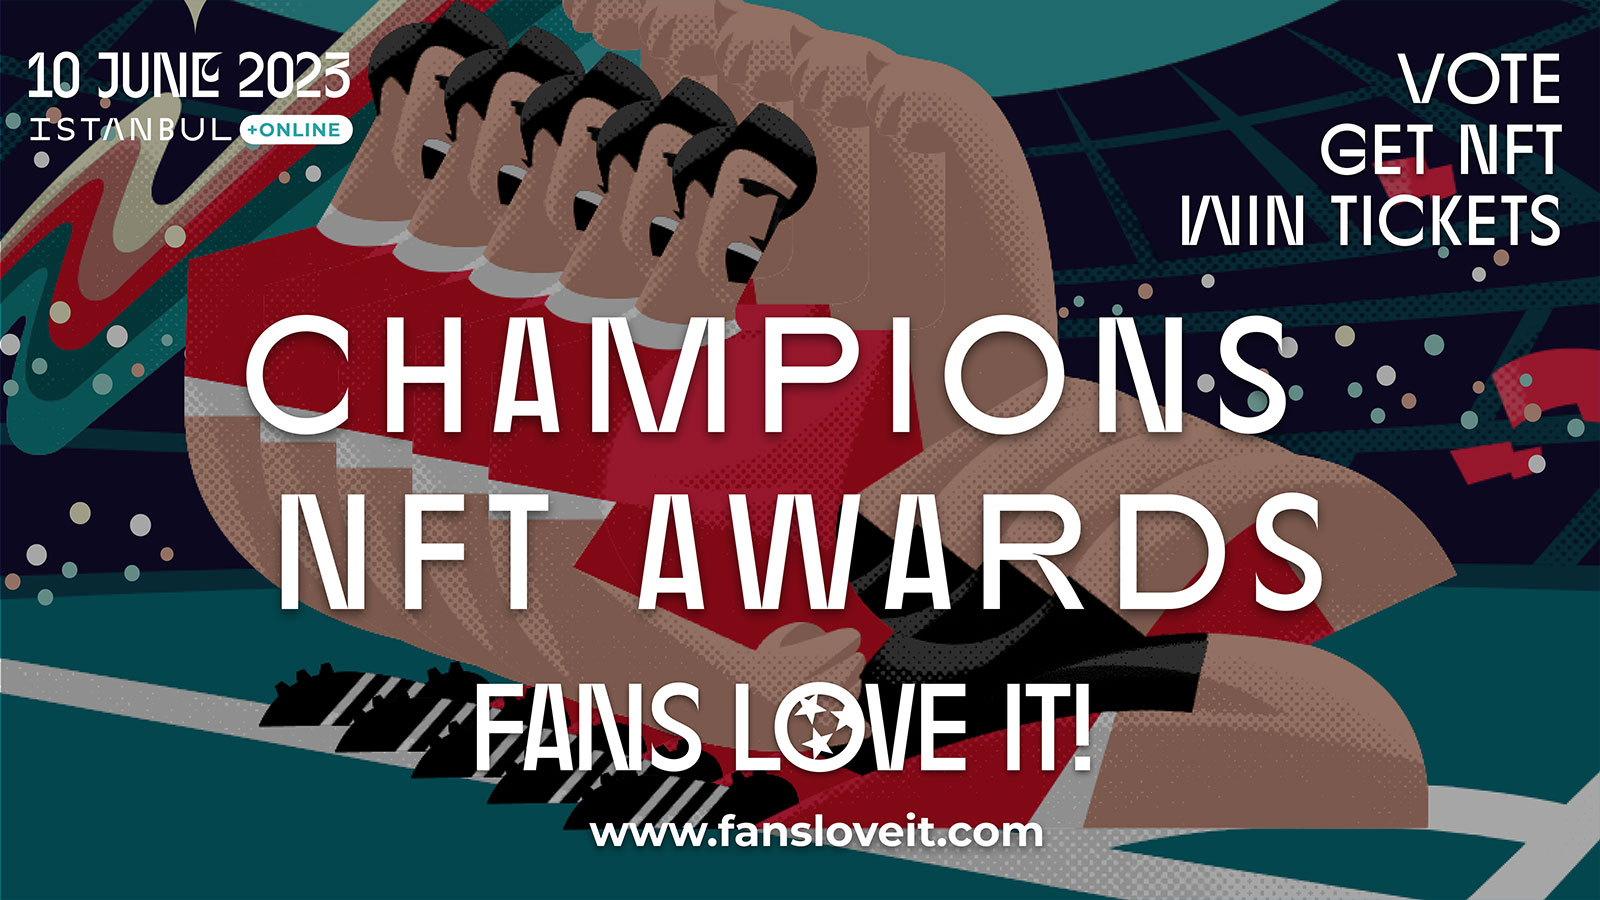 FANS LOVE IT! Conference Announces the Start of Entries for the CHAMPIONS NFT AWARDS Contest